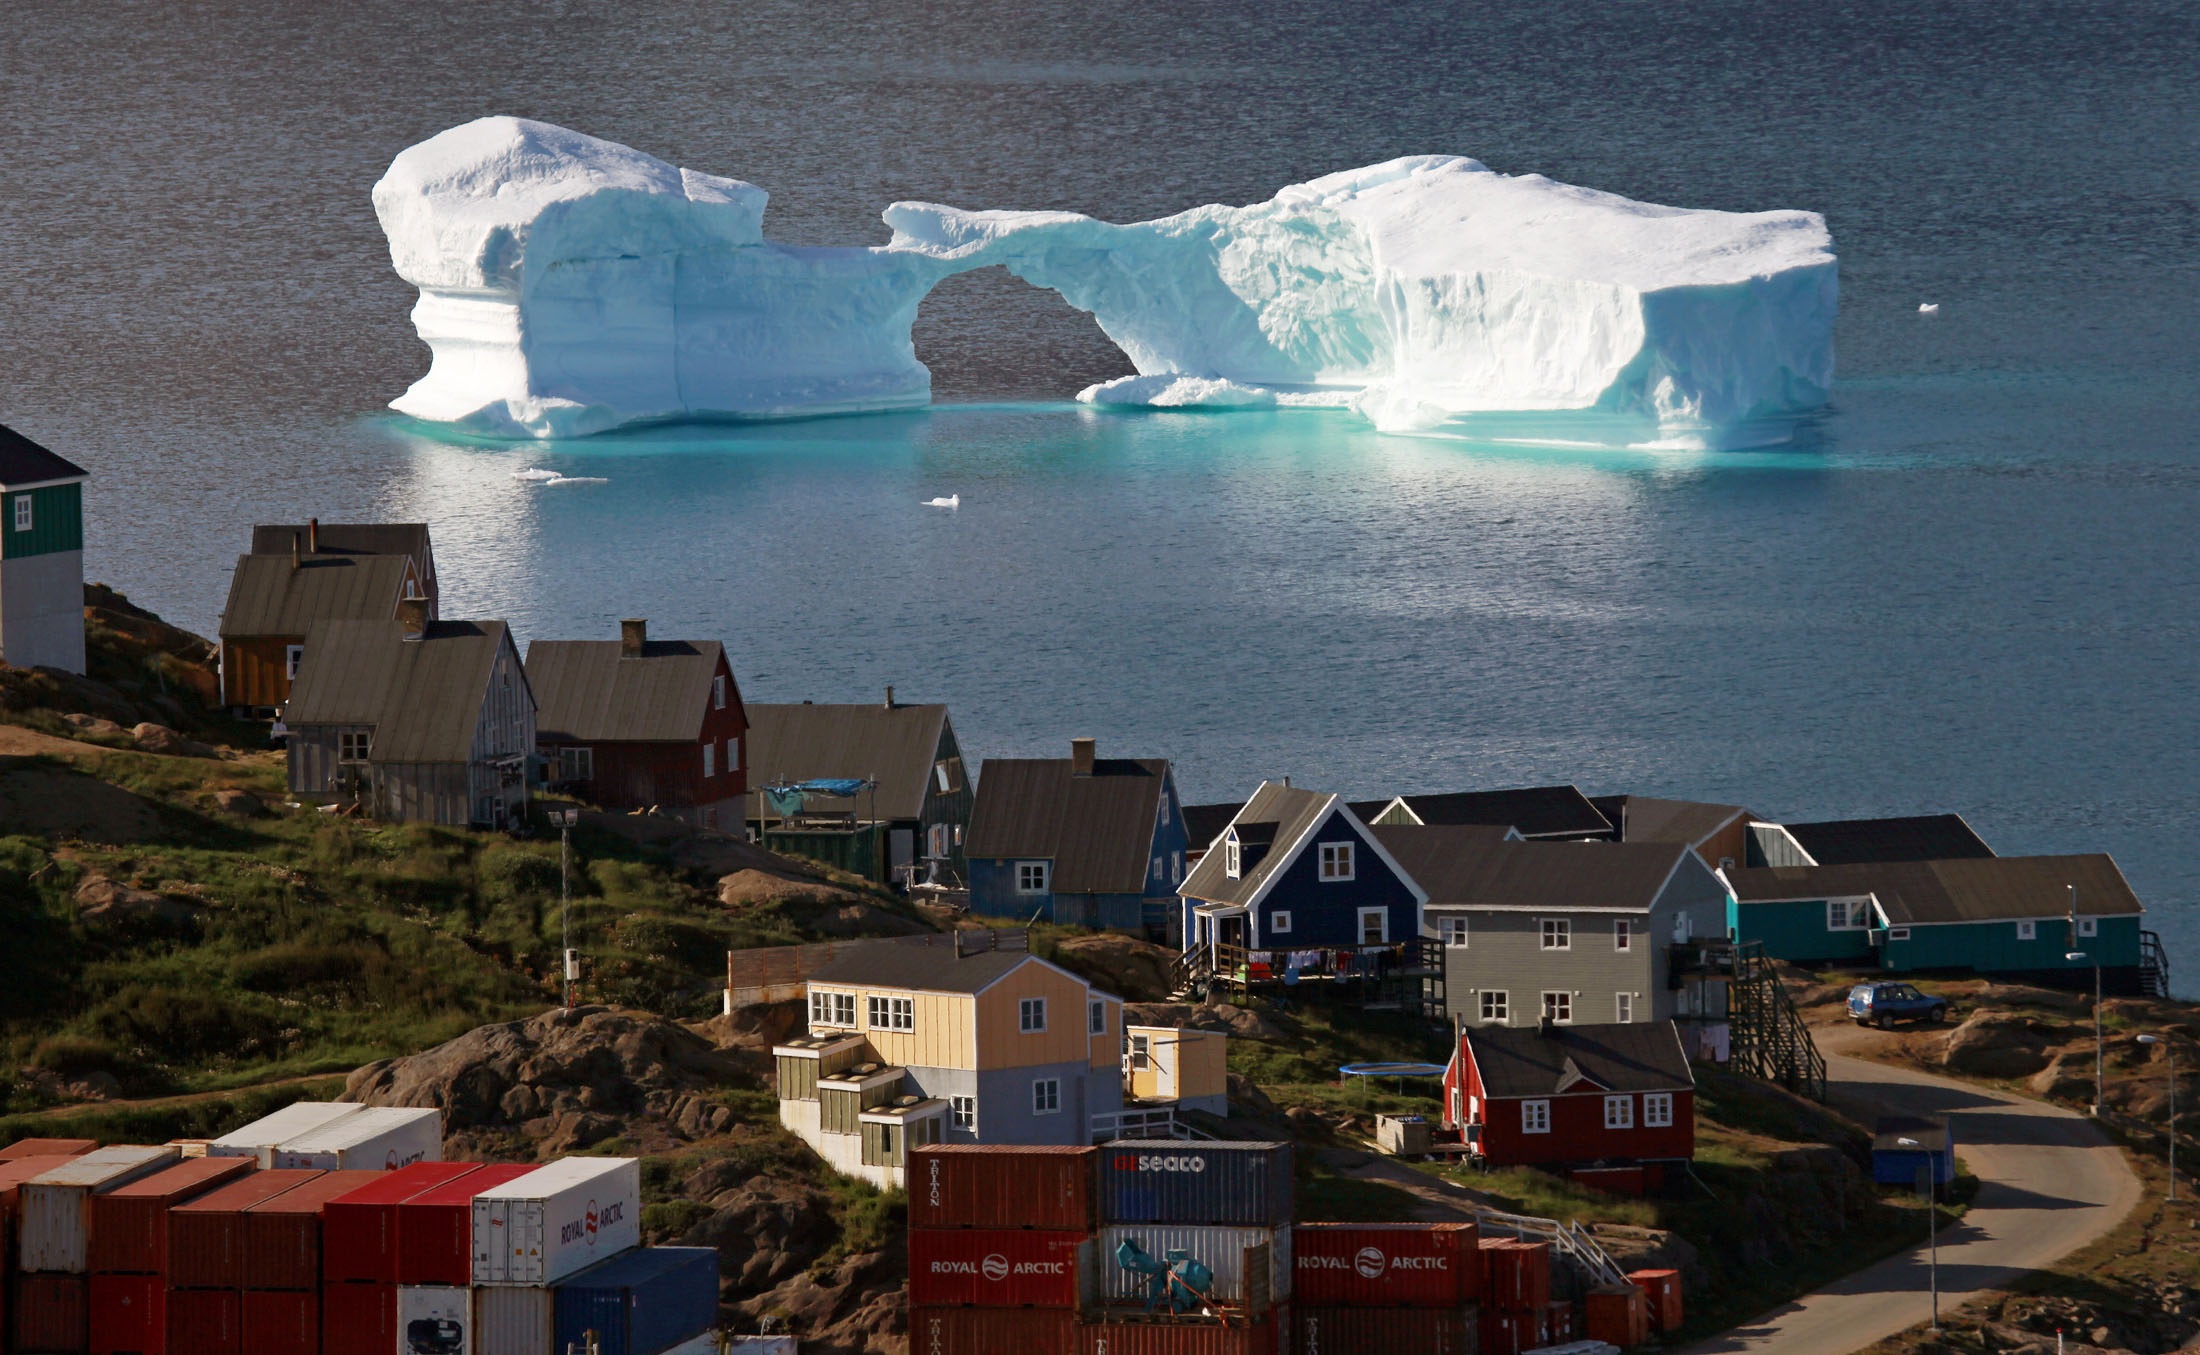 An iceberg floats near the town of Kulusuk east Greenland. The Arctic, Greenland and the oceans, among many other places, has noted accelerating climate change. Photo: Reuters